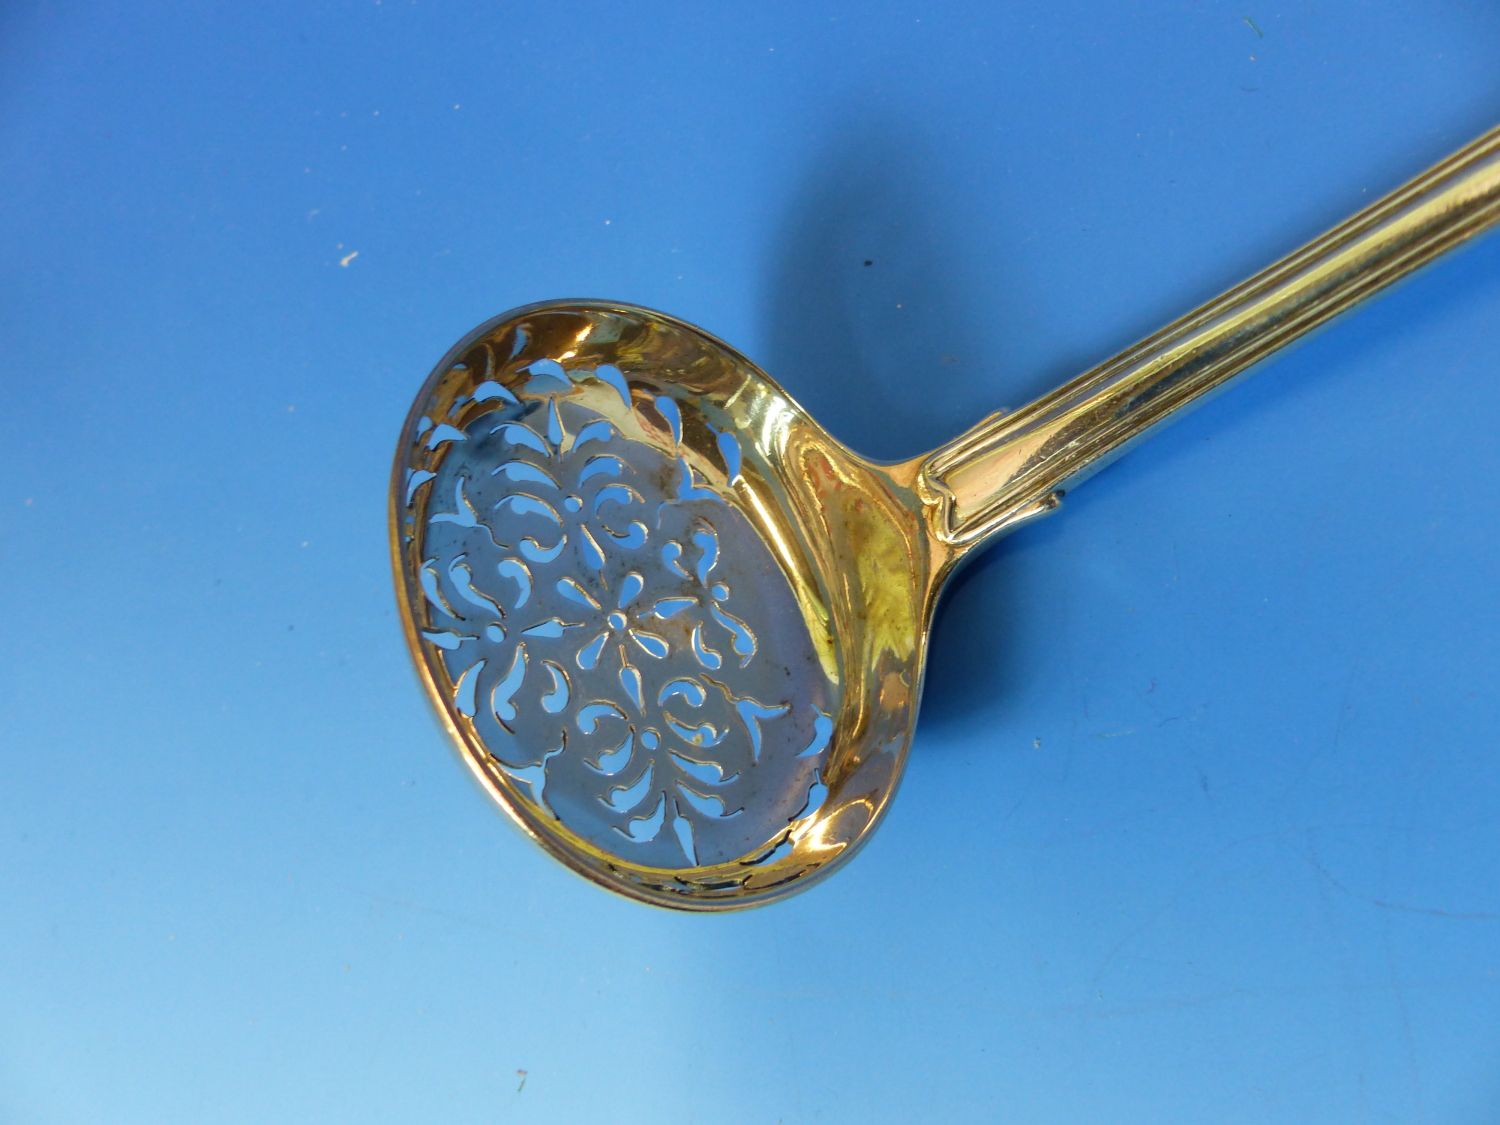 A PAIR OF 19th C. QUEENS PATTERN HALLMARKED SILVER SAUCE LADLES DATED 1851 GLASGOW FOR JOHN - Image 22 of 28